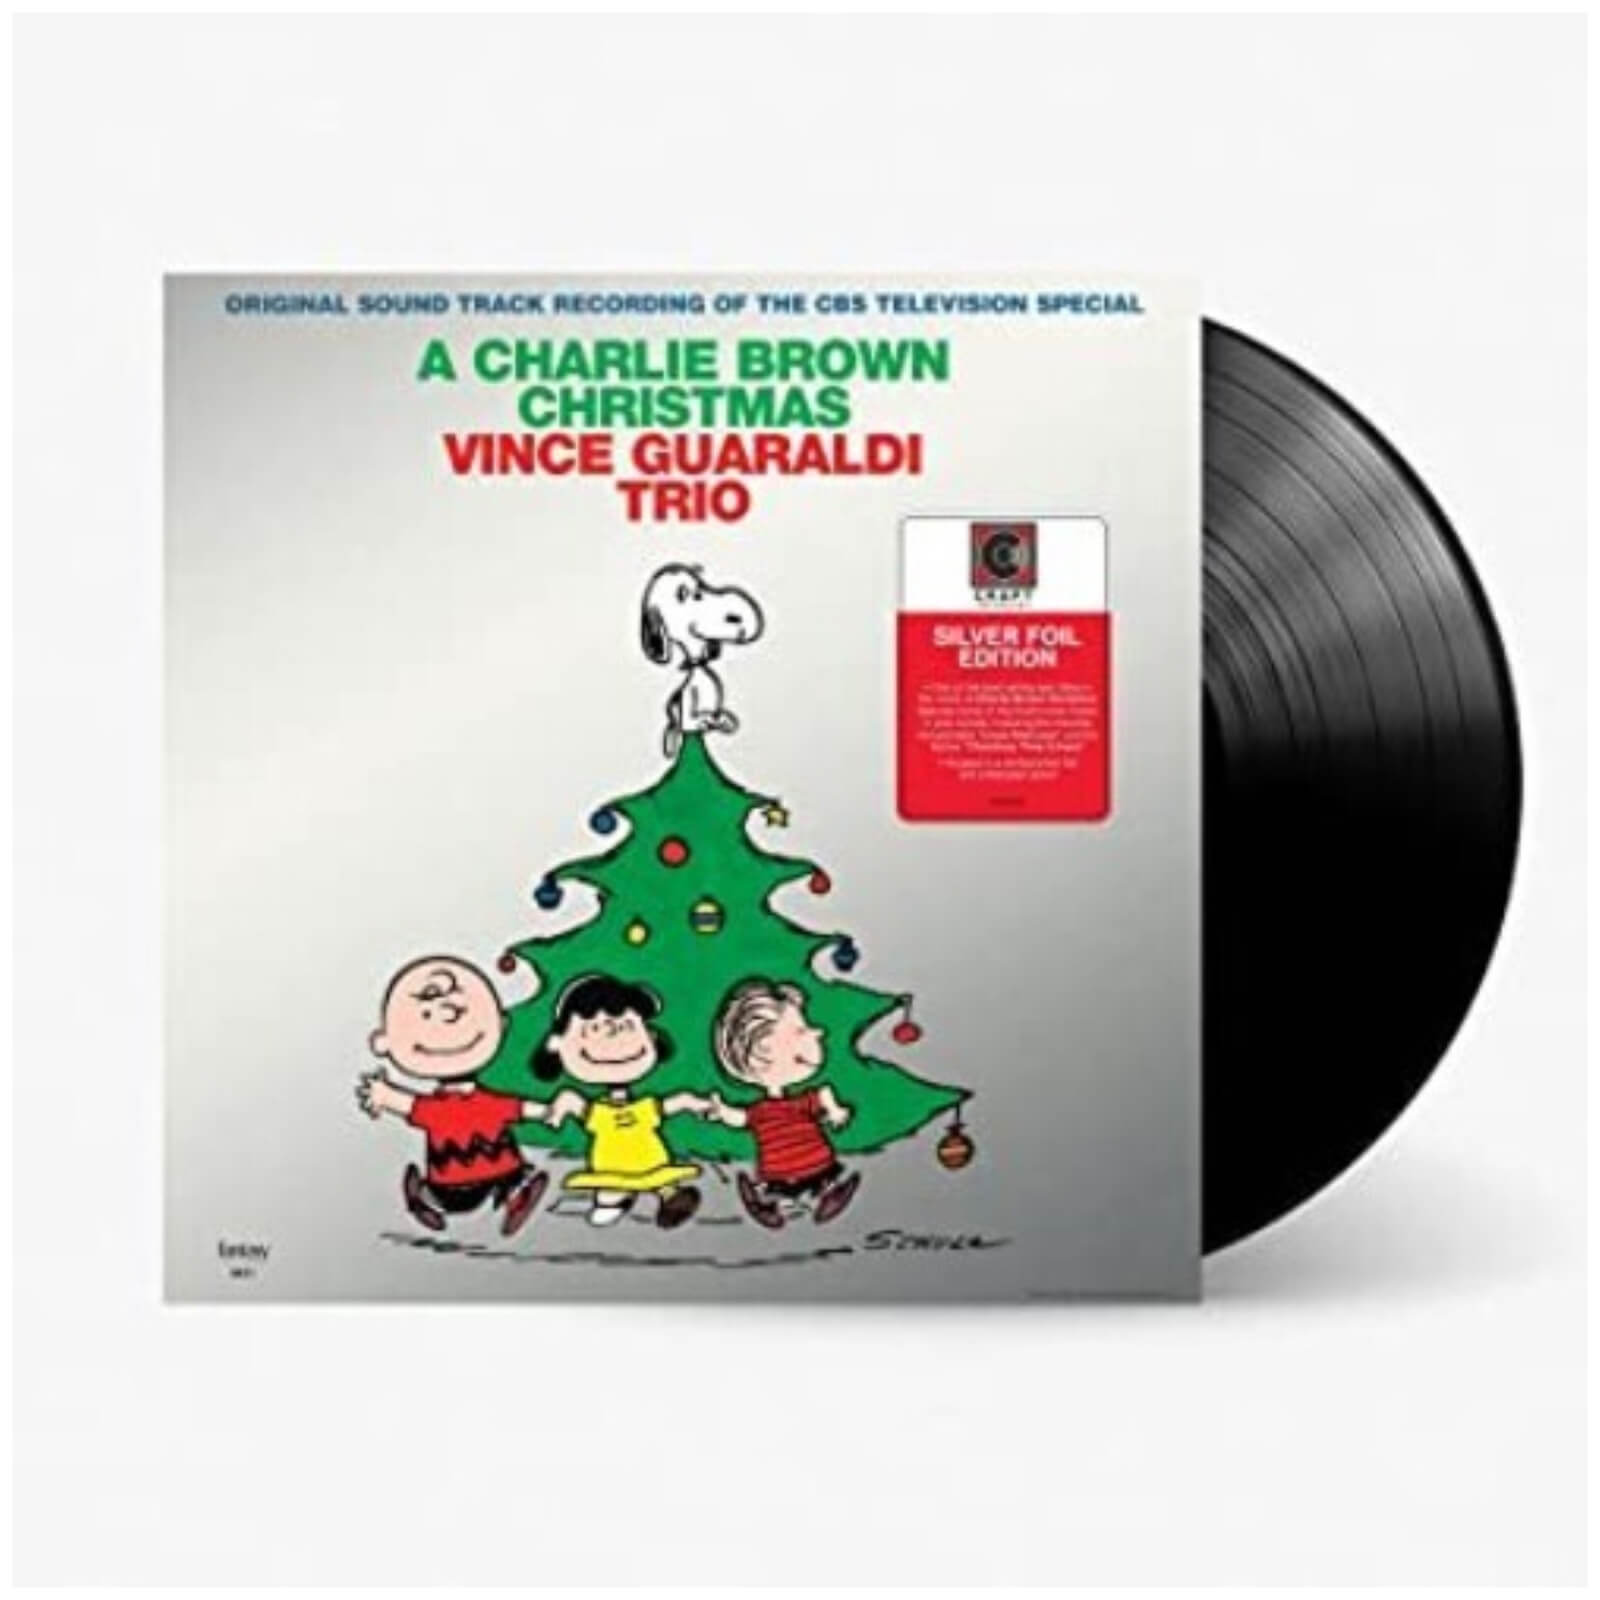 A Charlie Brown Christmas (Original Sound Track Recordings Of The CBS Television Special) LP (2021 Edition)